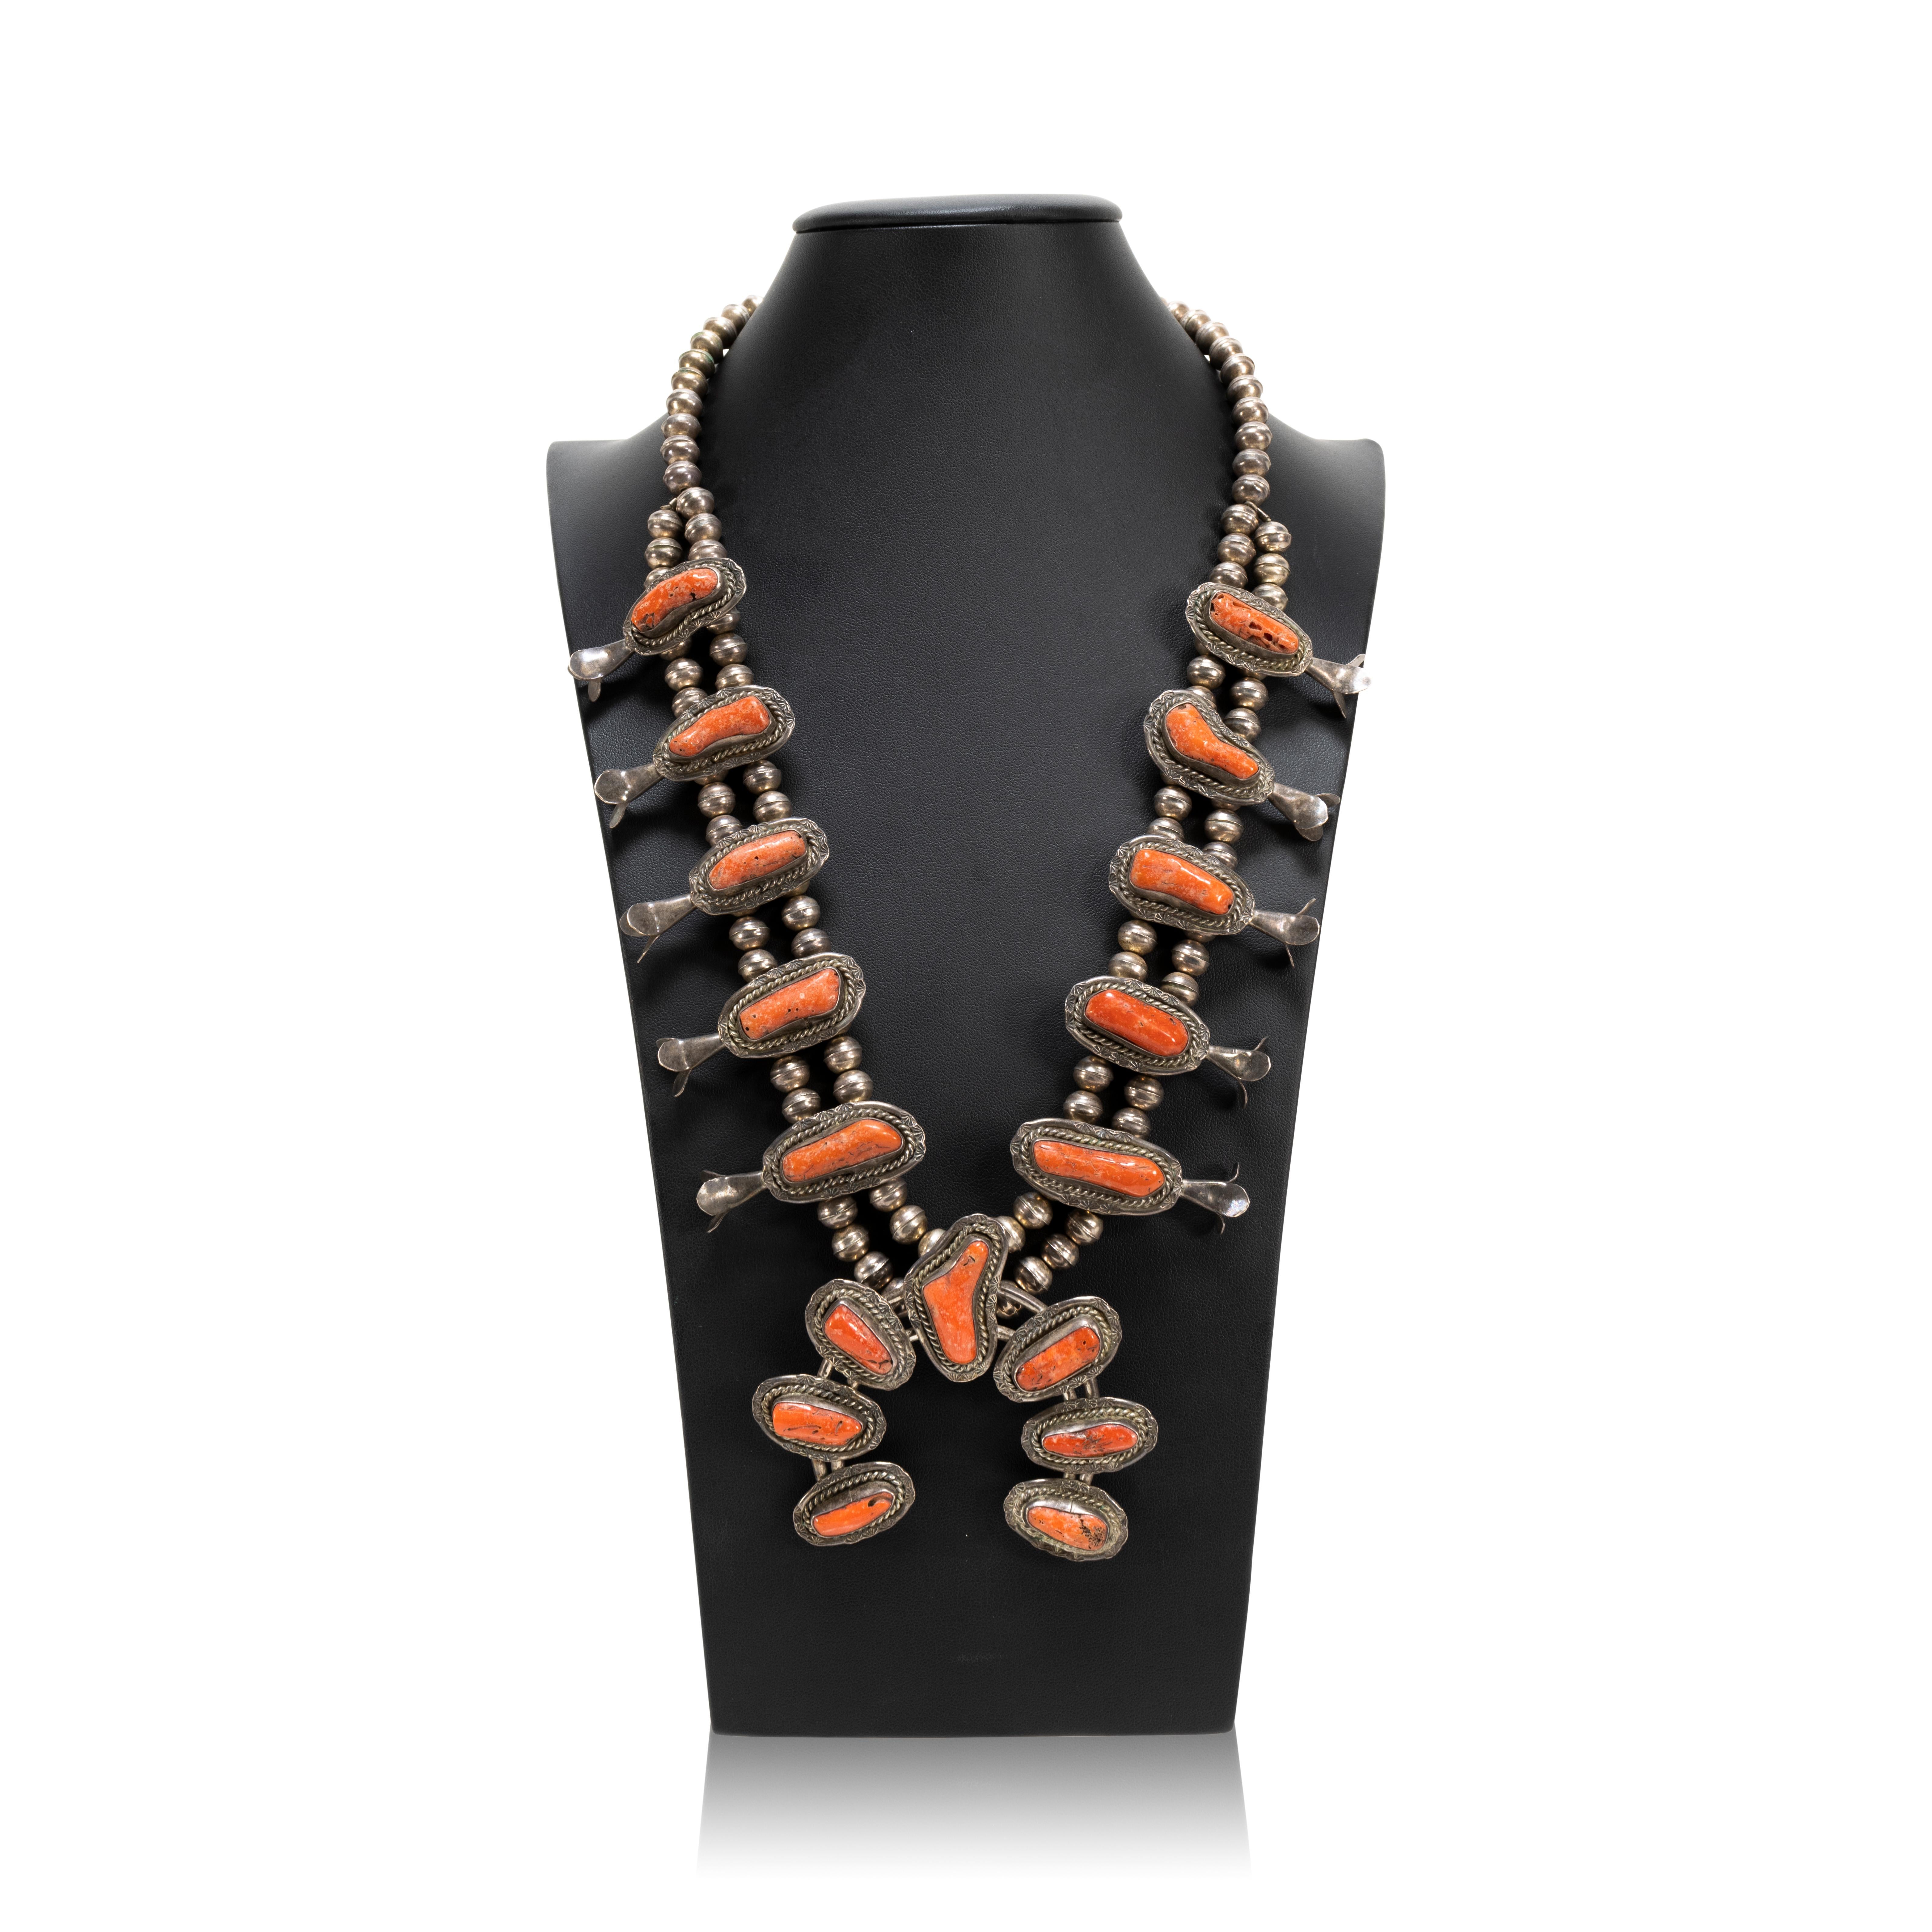 Navajo coral and sterling silver squash blossom necklace featuring a classic naja with seven beautiful coral cabochons accented by twisted rope and light hand stamped designs. The petal blossoms along the neck feature more stunning coral with the